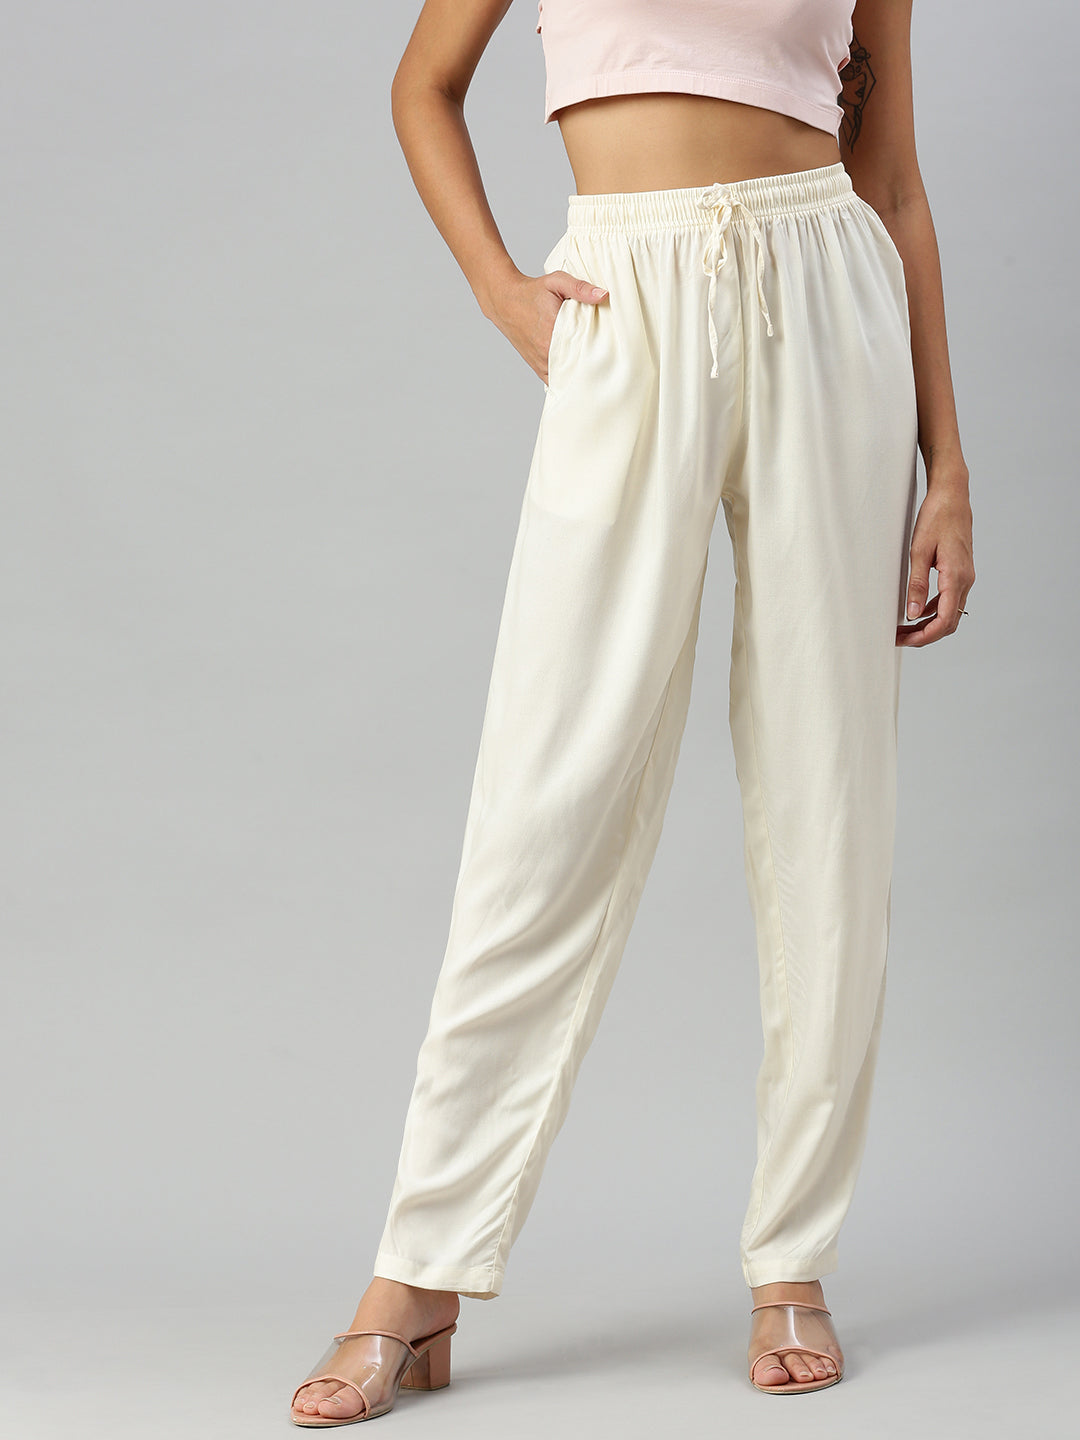 Prisma Casual Pant-Cream: Chic and Comfortable Clothing for Women